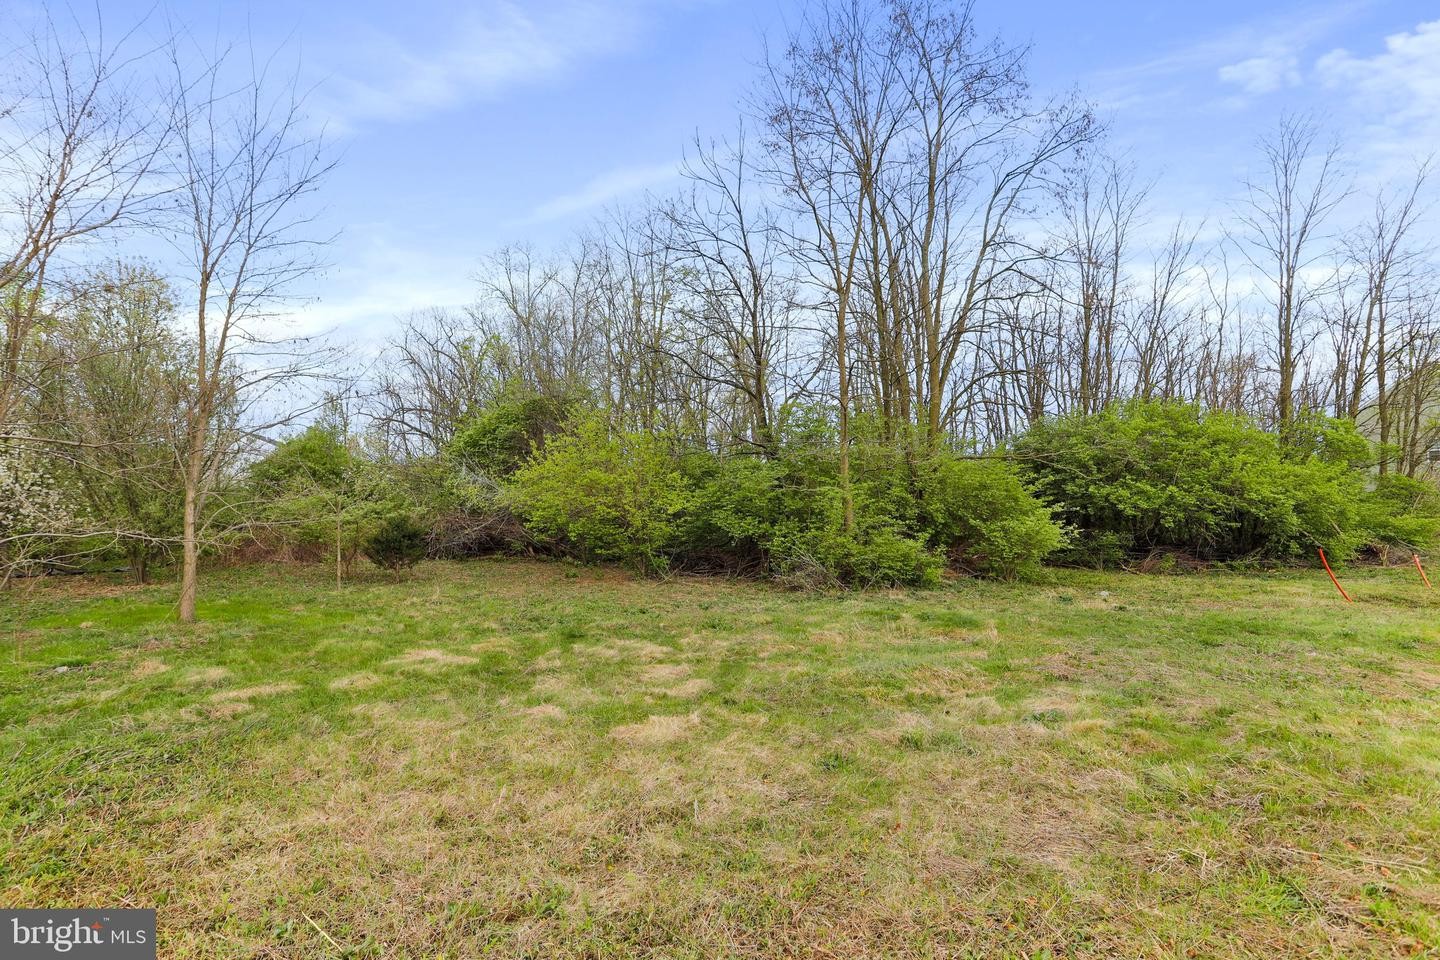 4. Lot 65 Wedgewood Dr